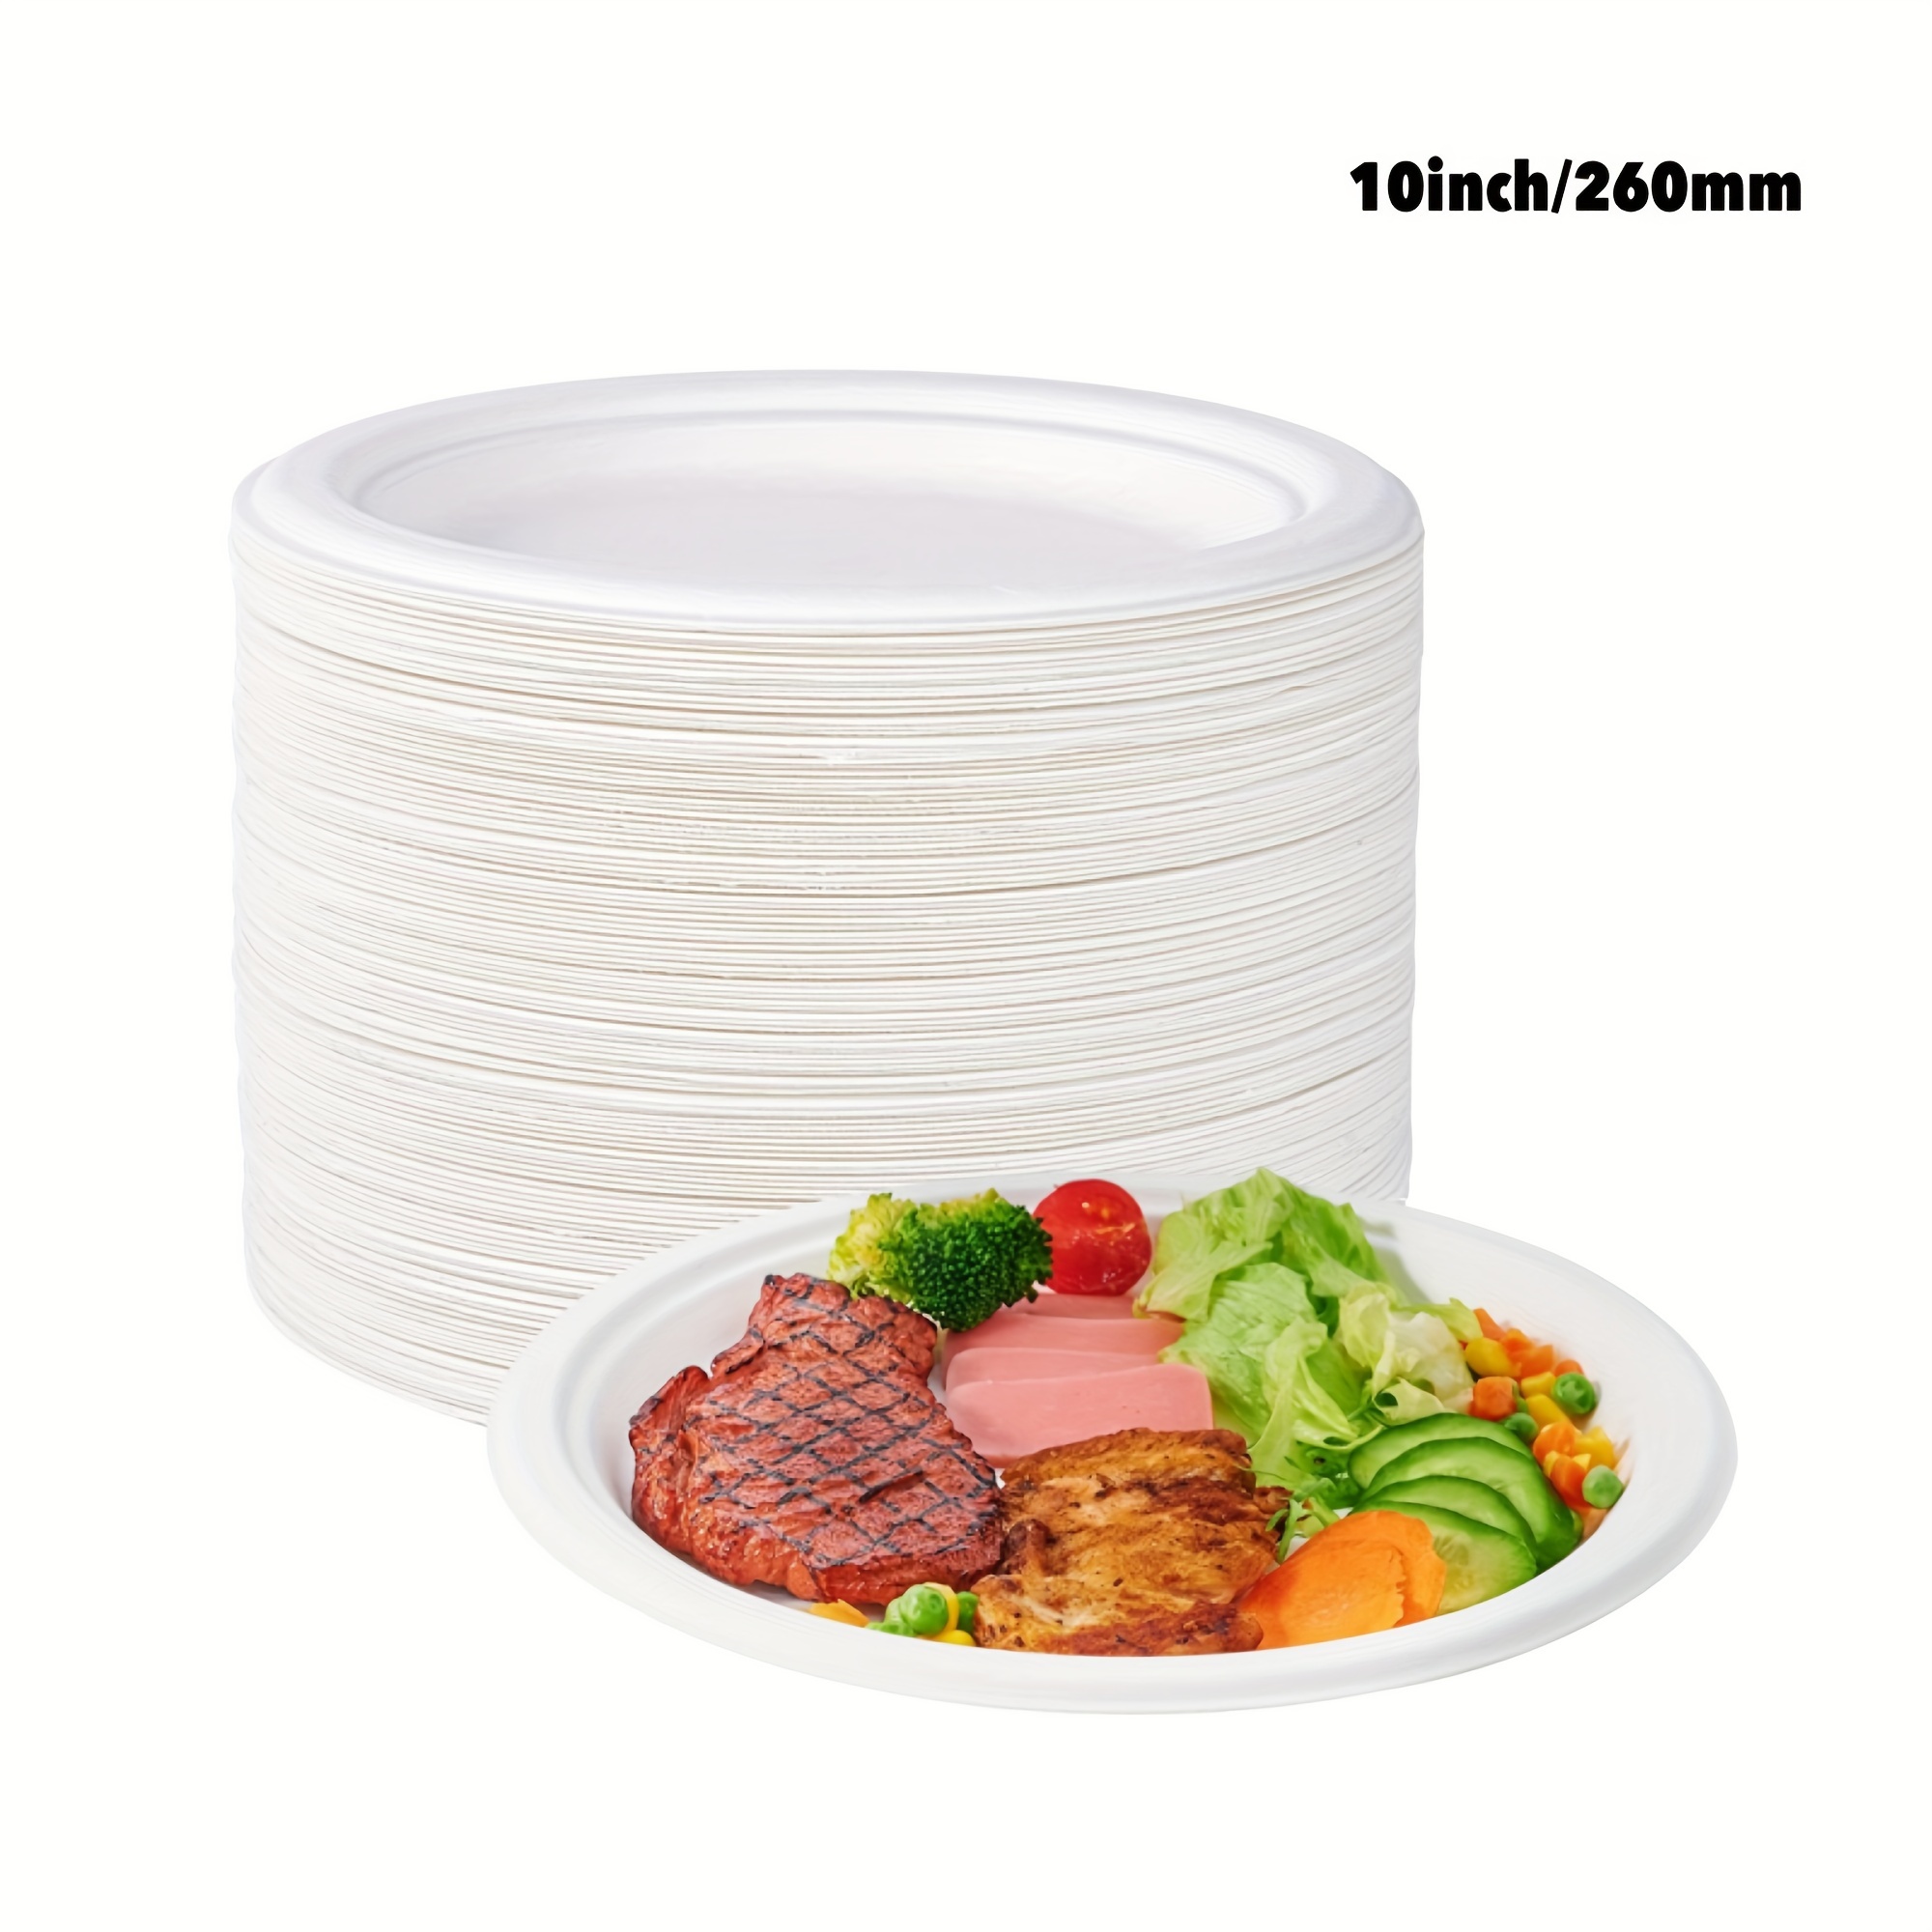  200 Count Dessert Plates 4 Inch Paper Plates Disposable Square  Plates White Bagasse Natural Cake Plates and 200 Count Clear Plastic Forks  for Dessert Salad Appetizer Wedding Party Supplies : Health & Household